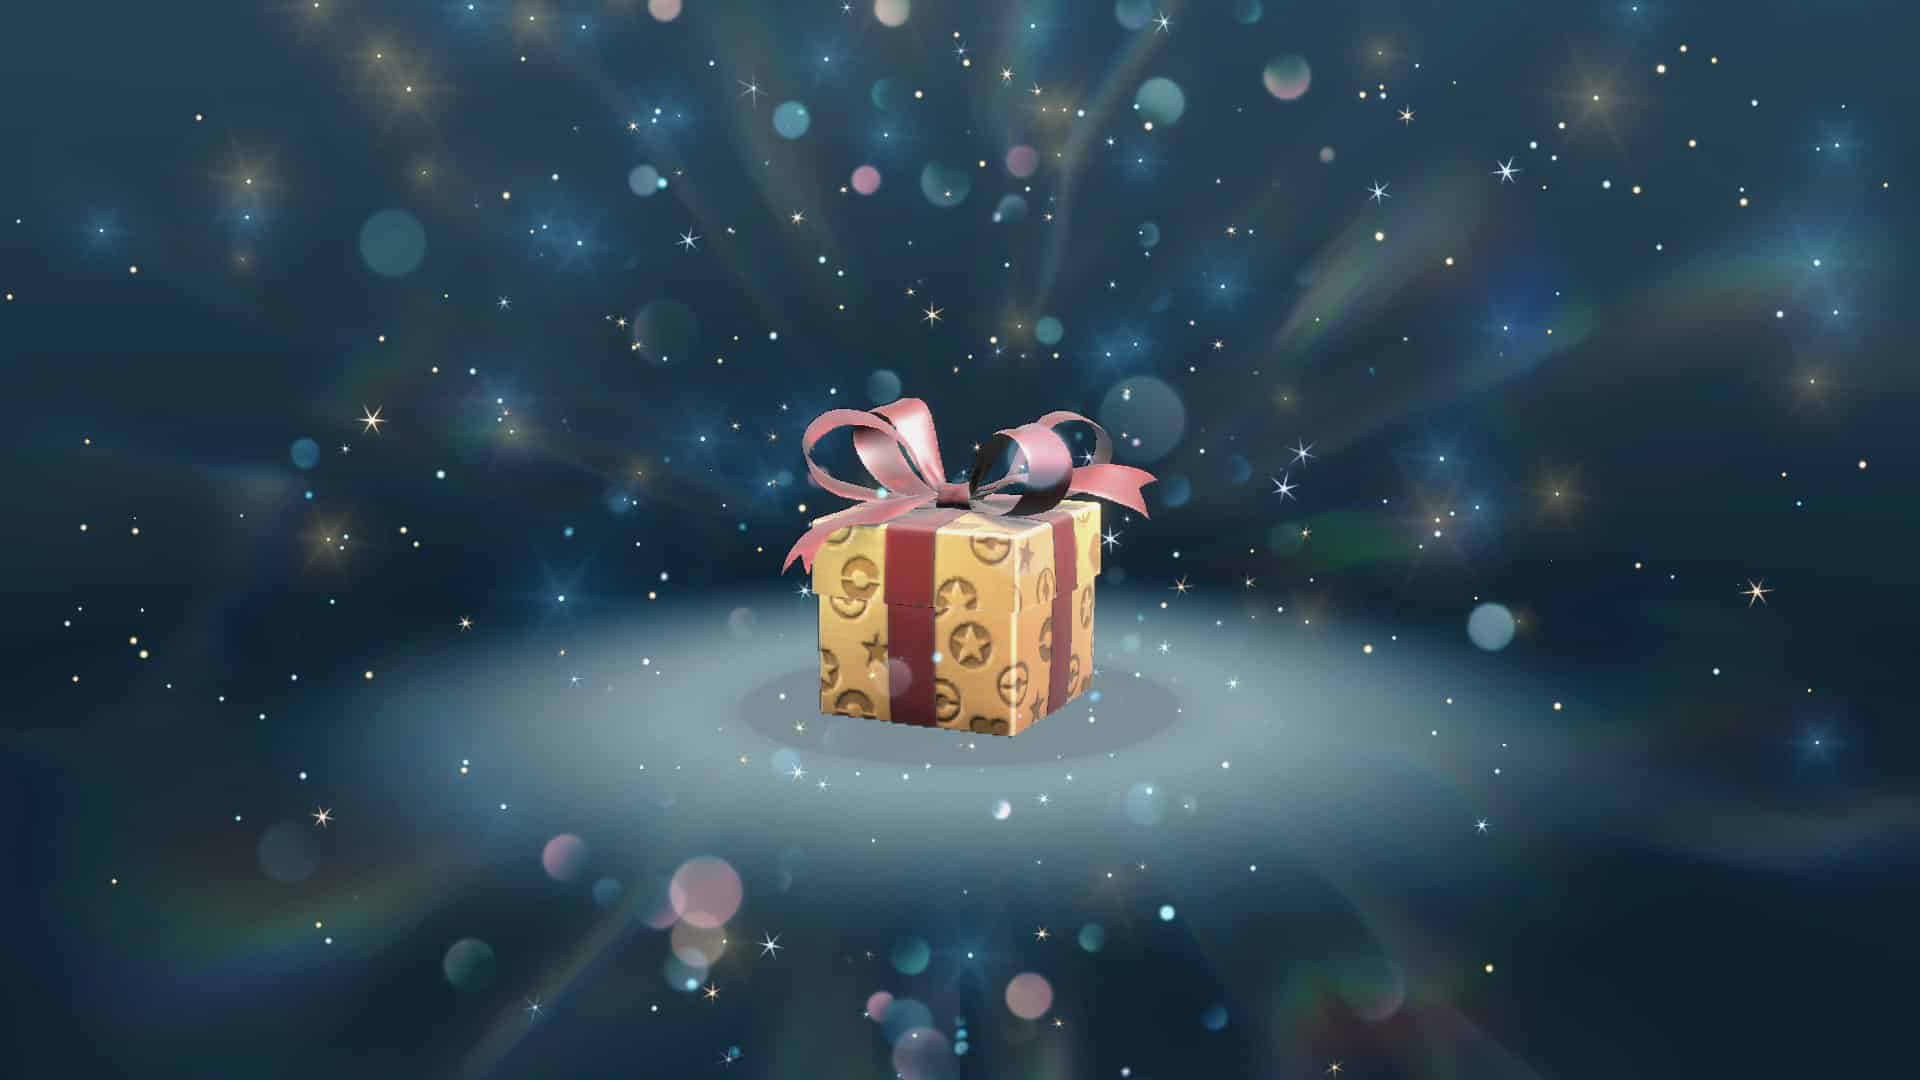 Pokémon Scarlet and Violet are giving away Mystery Gifts to celebrate the new year